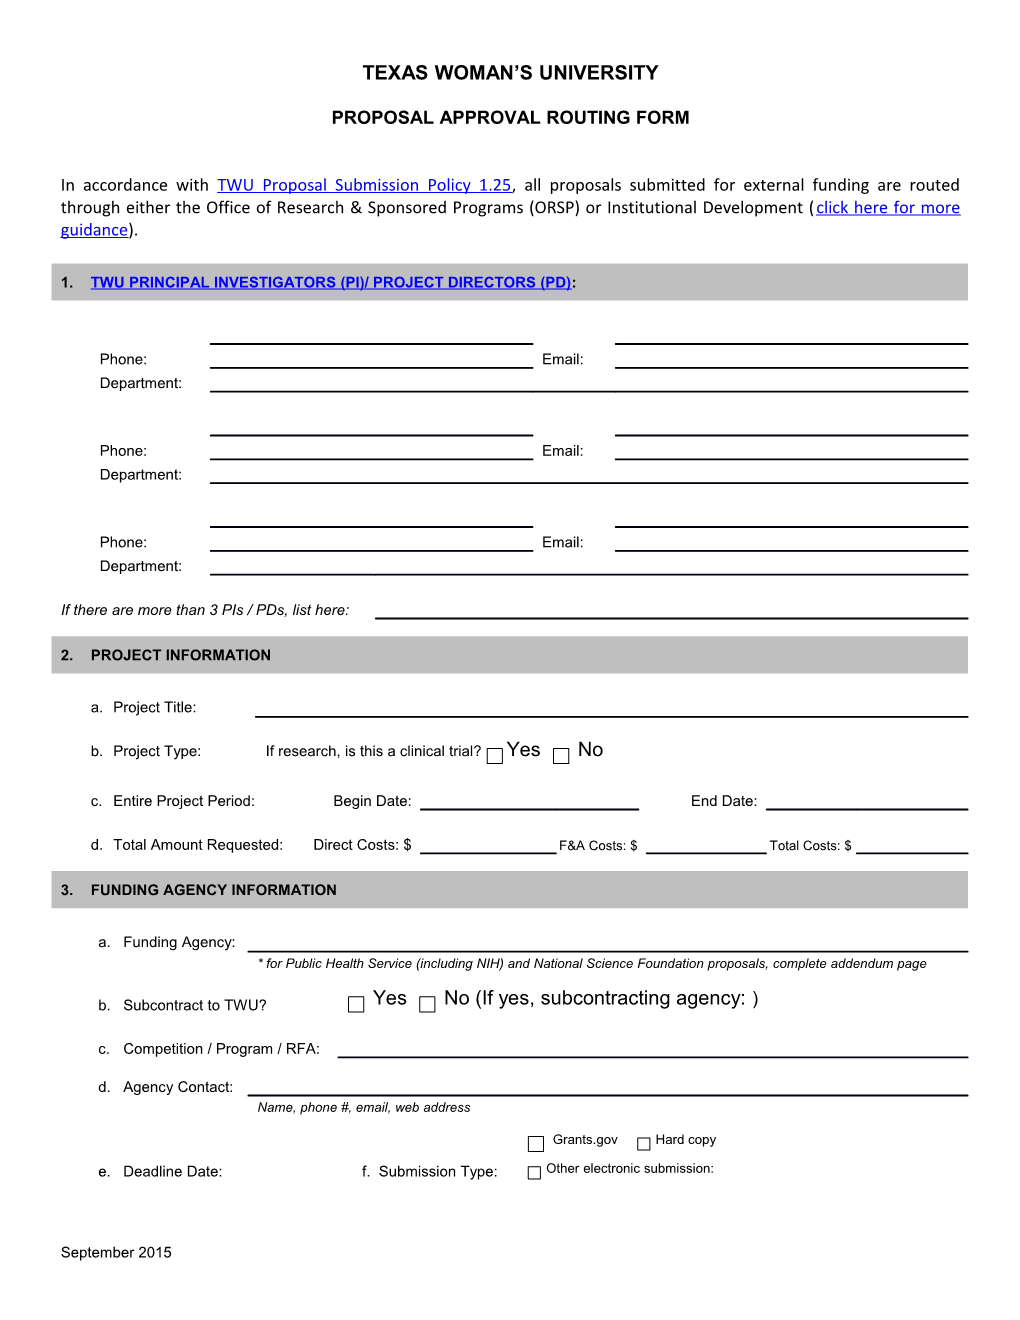 Approval Routing Form